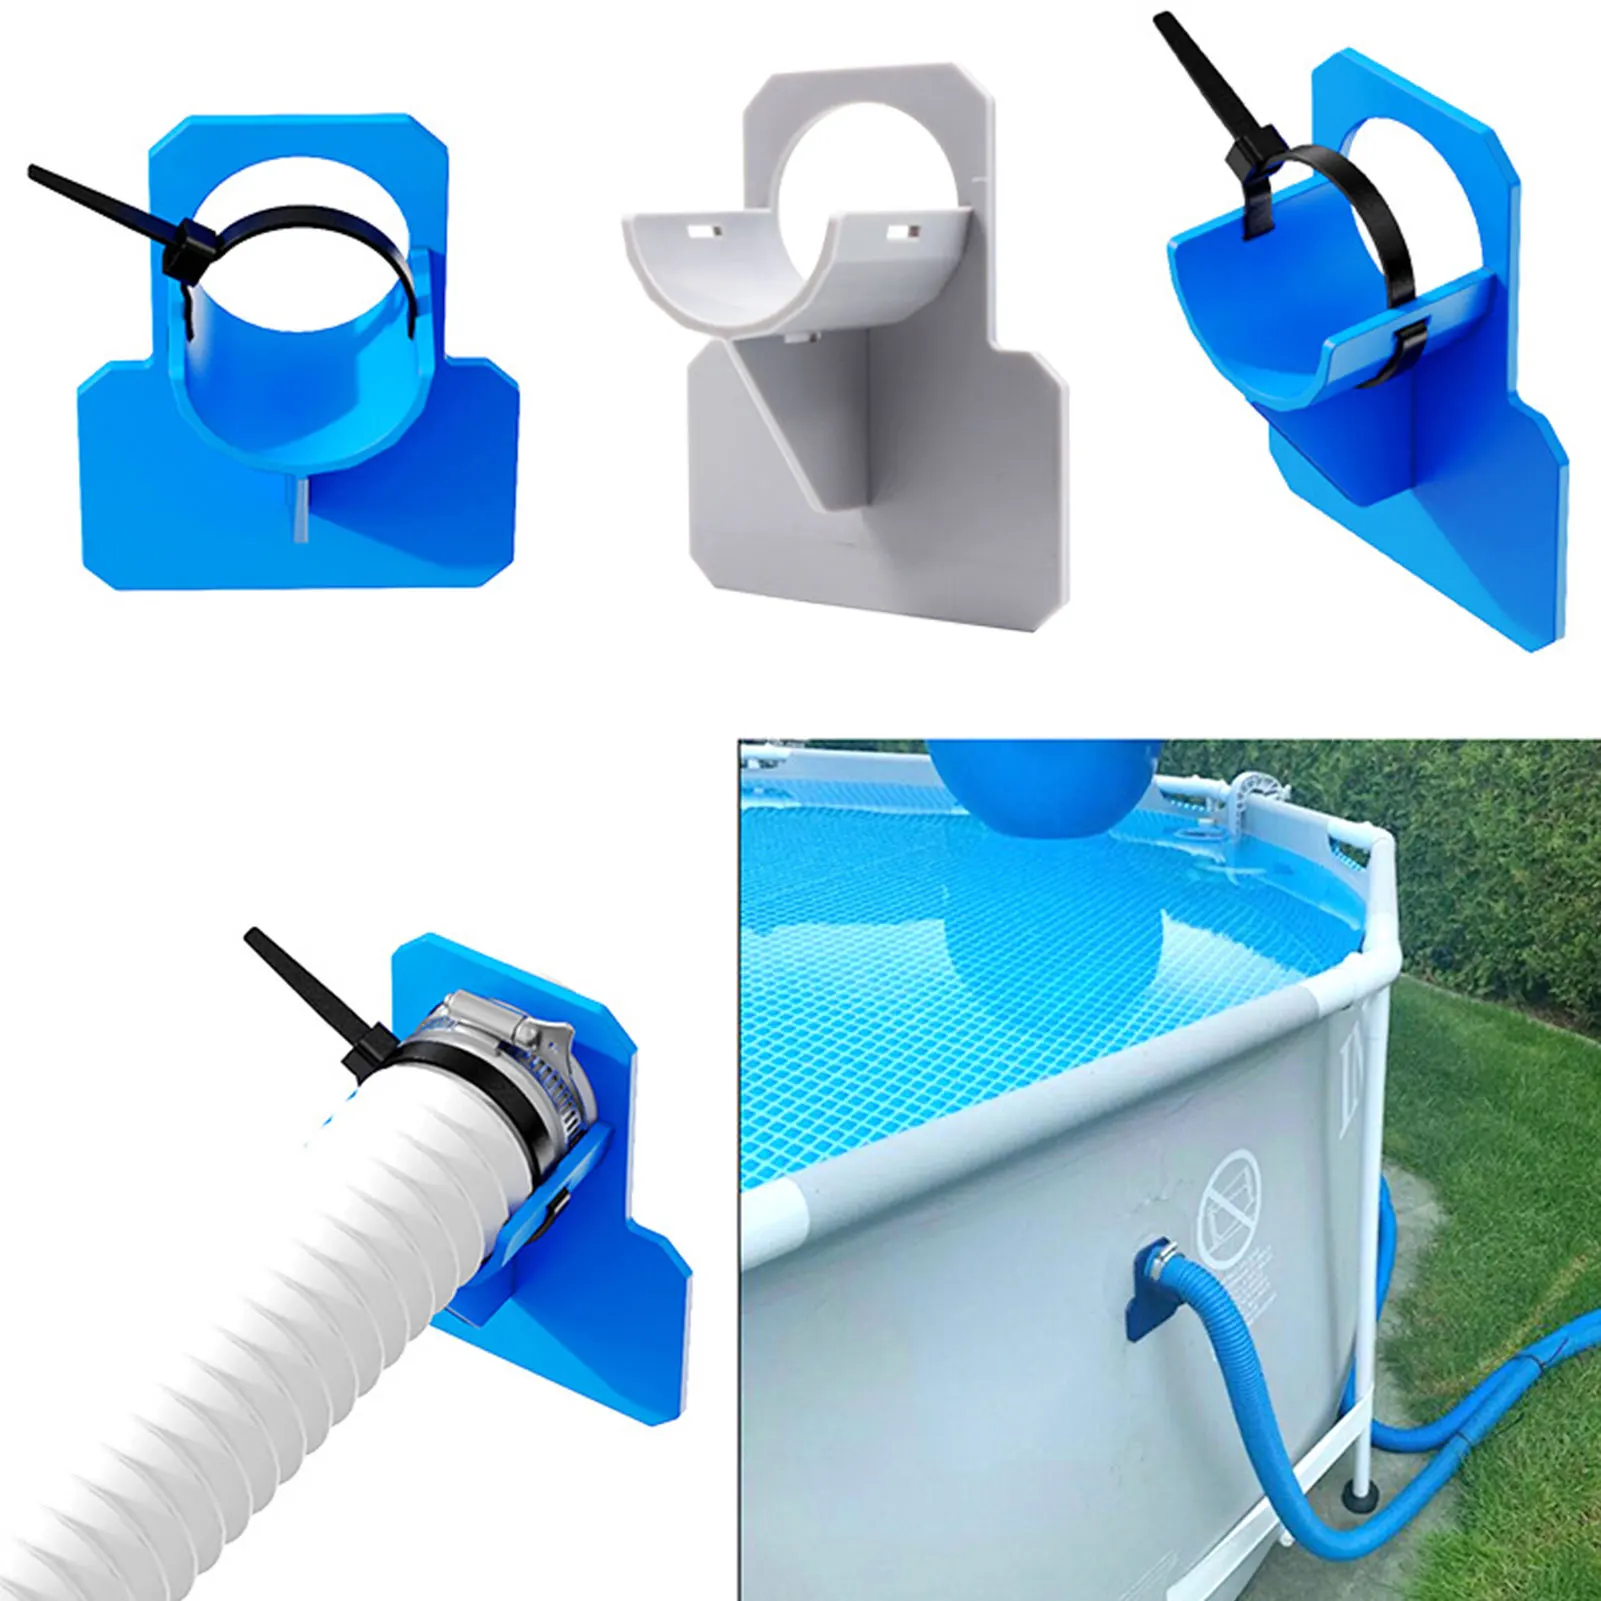 

2Pcs Swimming Pool Pipe Holders Mount Supports Pipes For Above Ground Pools Pool Accessories Preventing Pipes Sagging Accessory